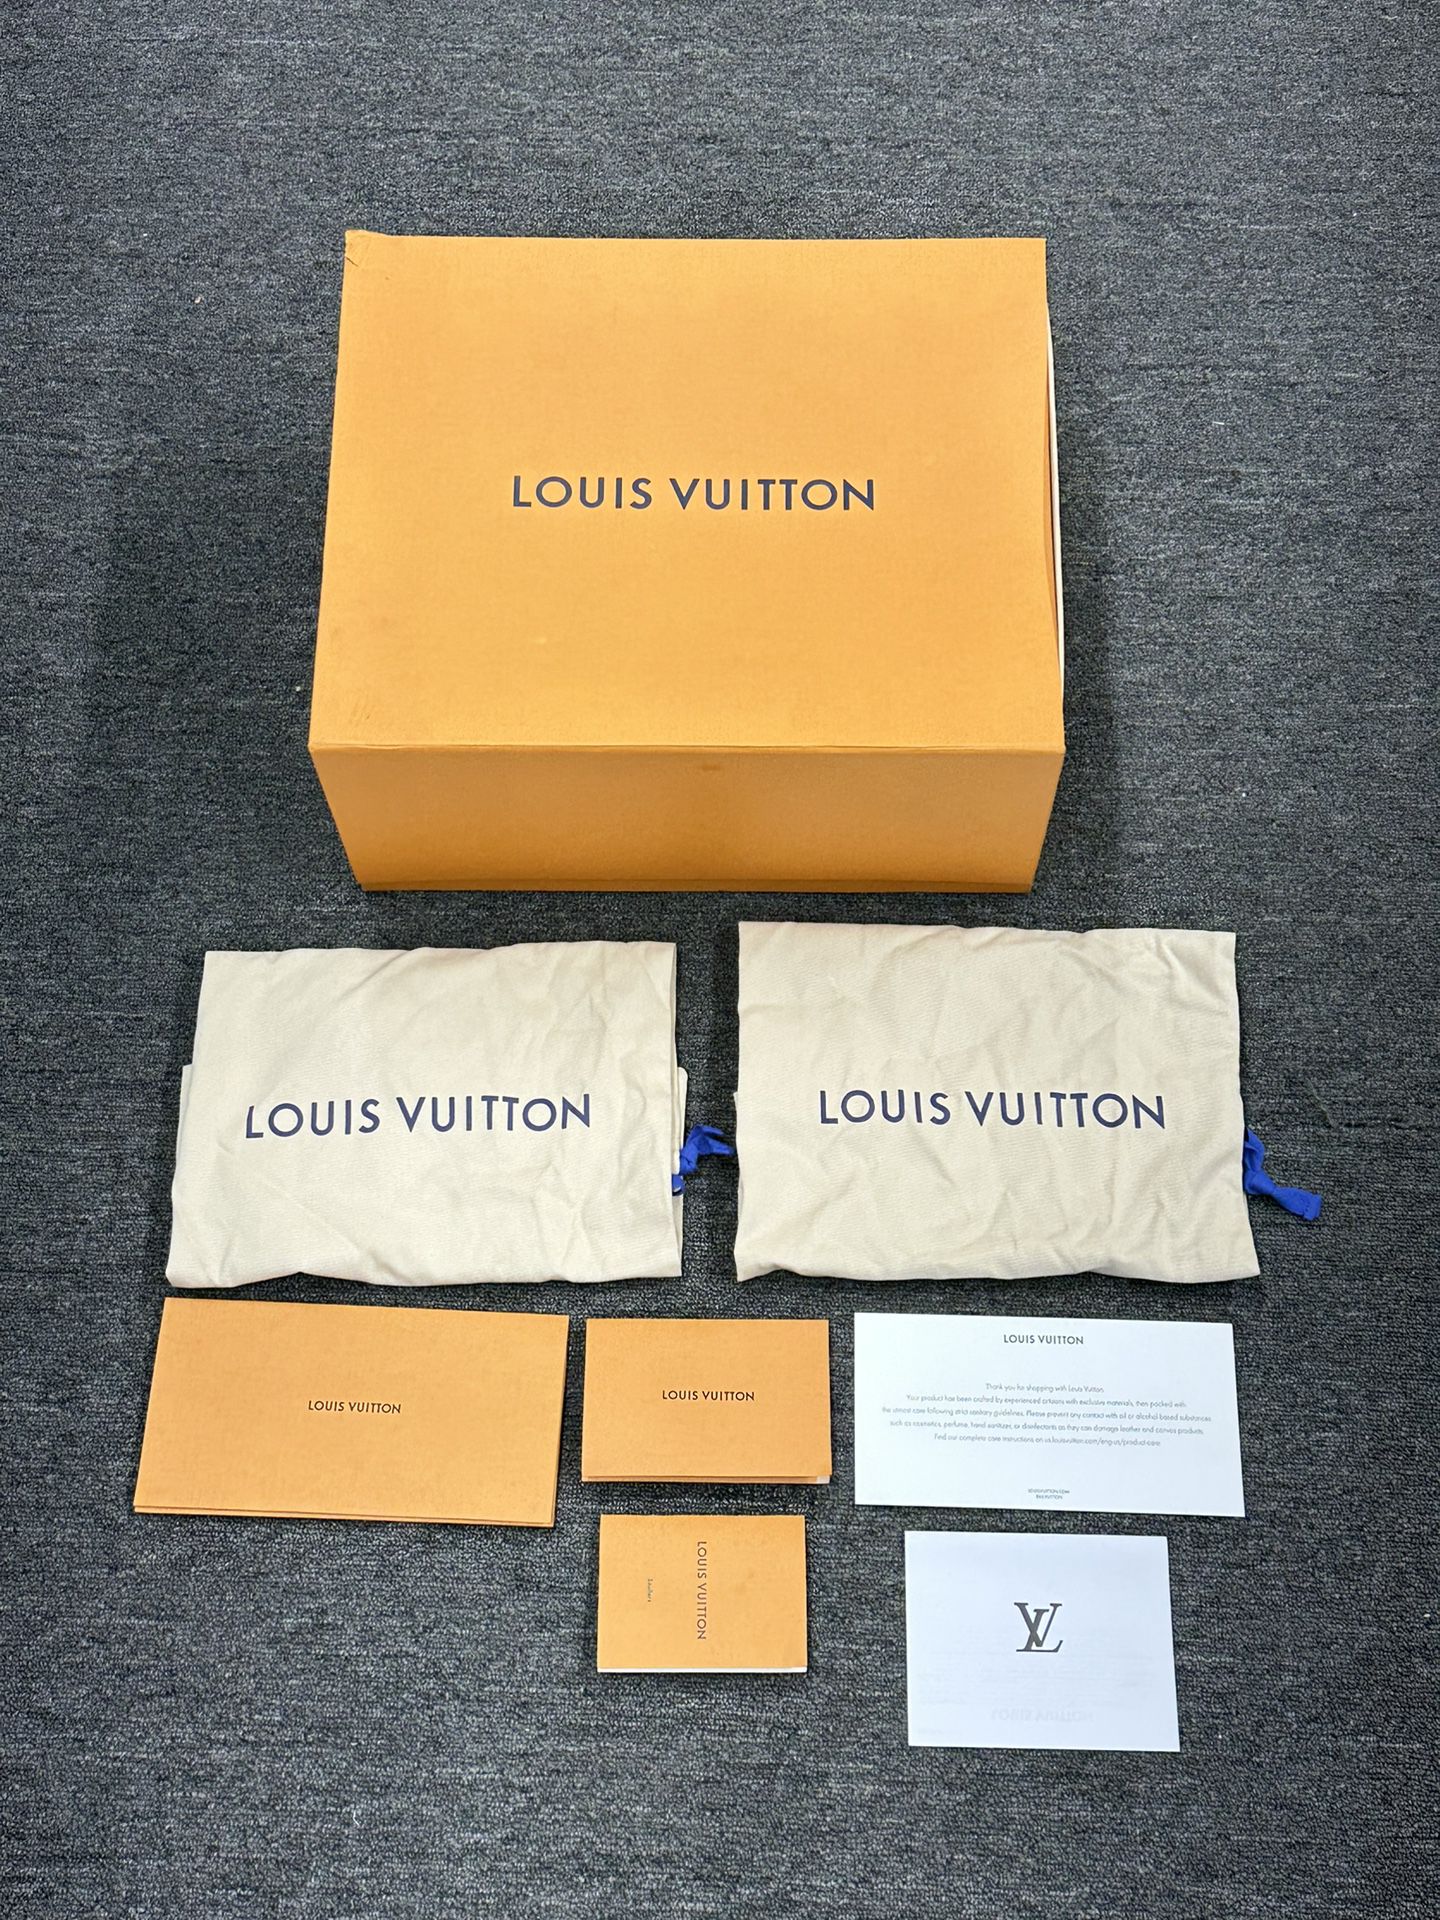 Louis Vuitton Large Orange Magnetic Storage Gift Box w/ Envelope & Dust  Bags for Sale in Irvine, CA - OfferUp